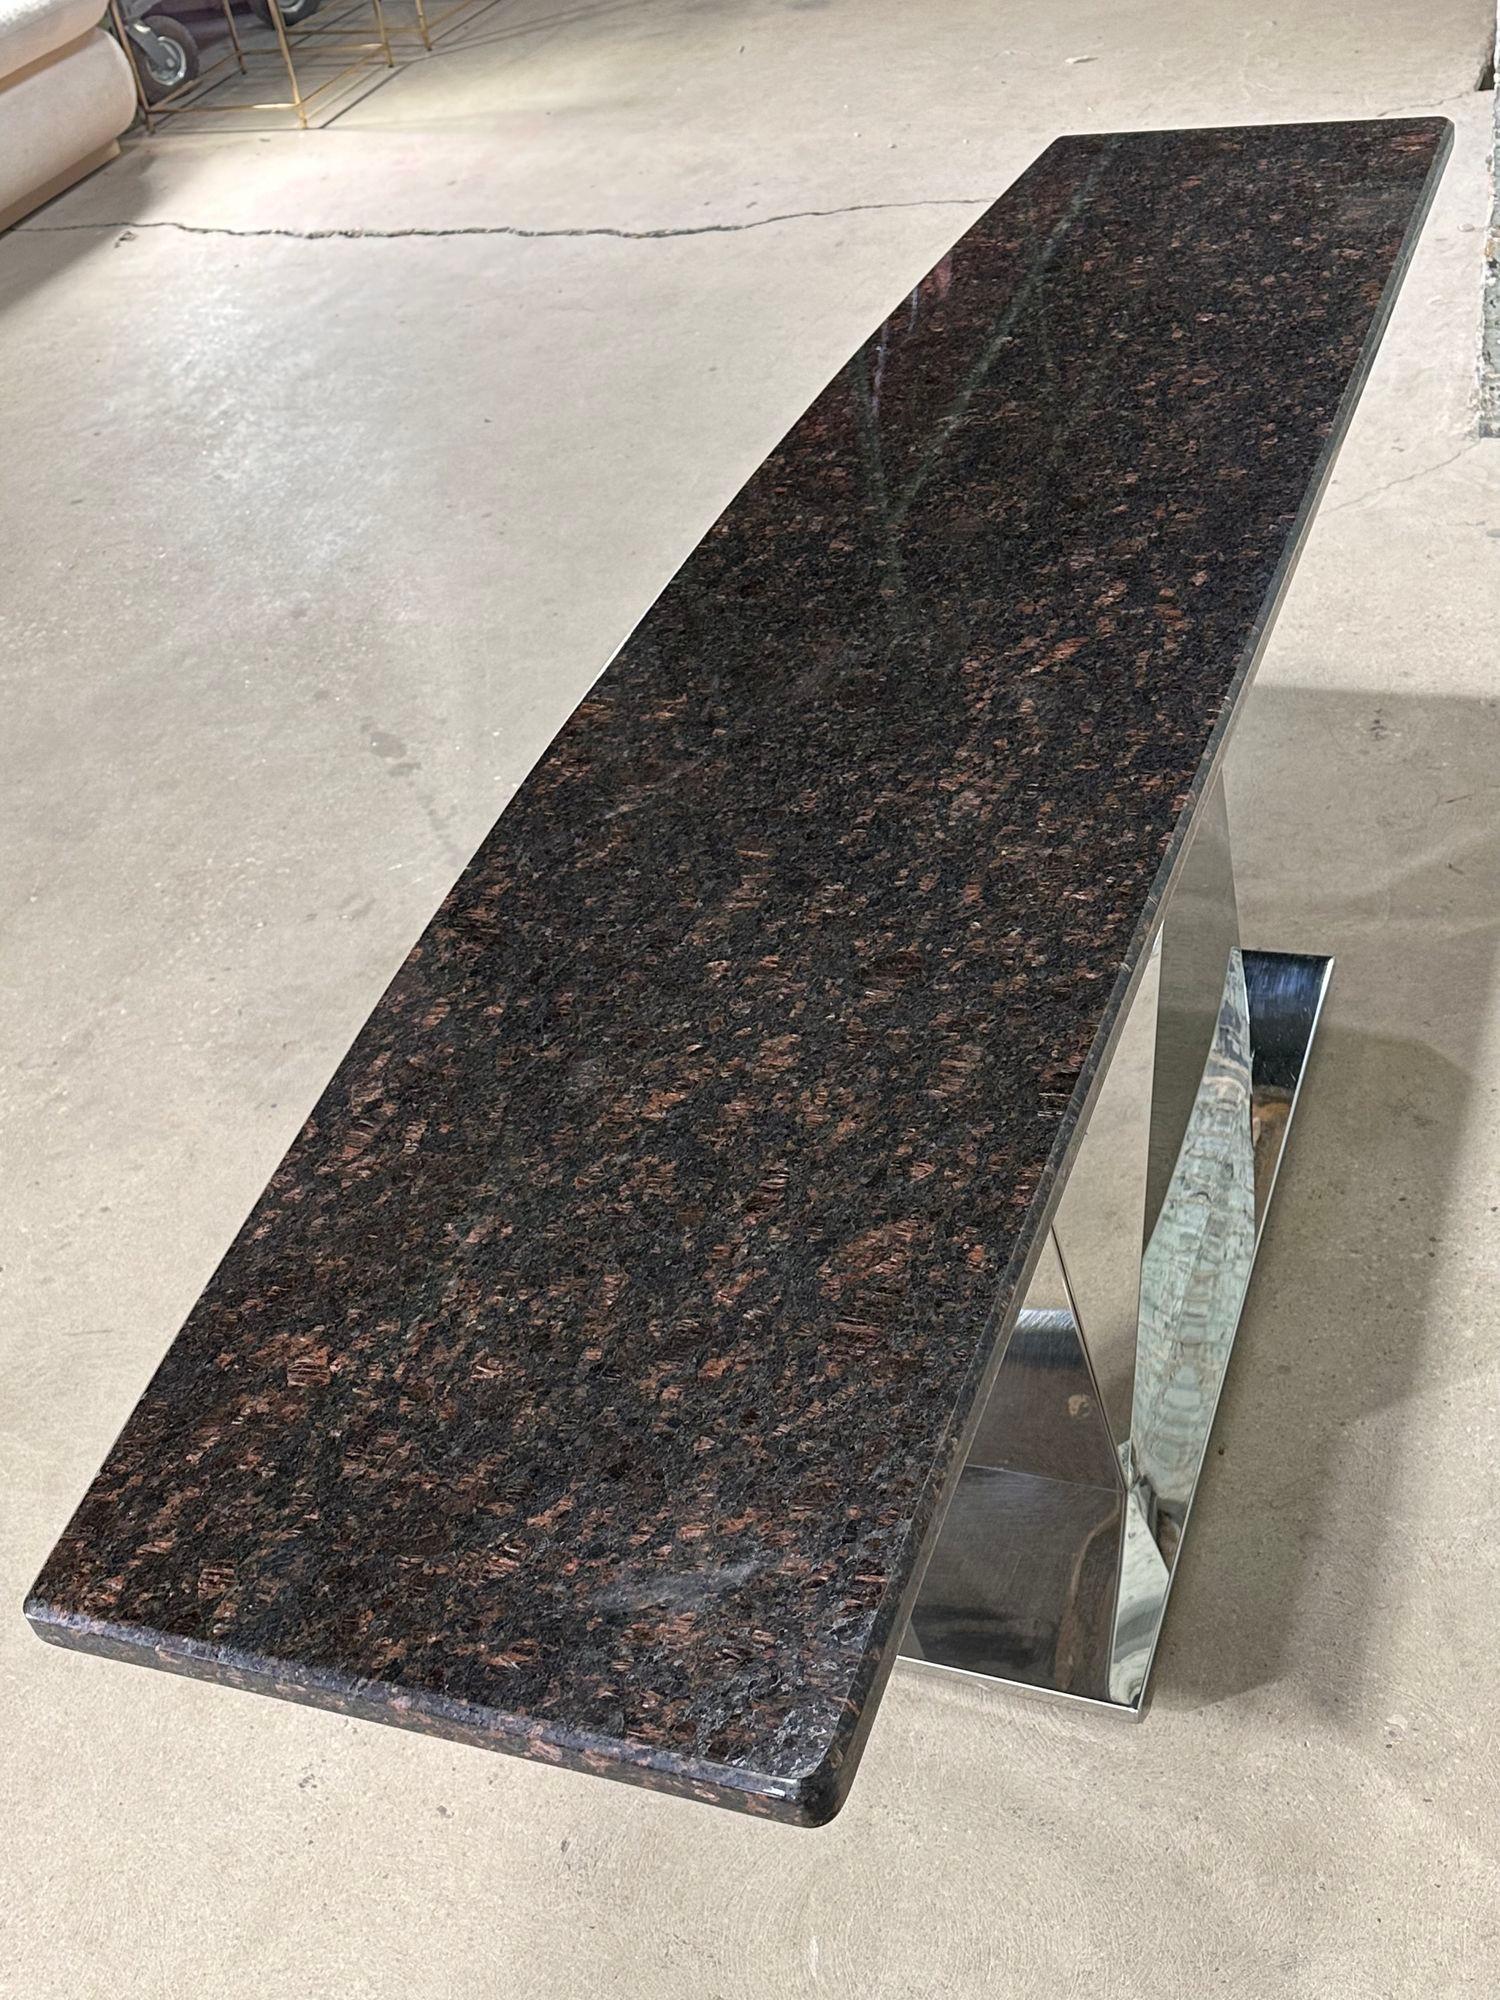 Sally Sirkin Style Multi Faceted Stainless Steel/Granite Console, 1970 For Sale 2